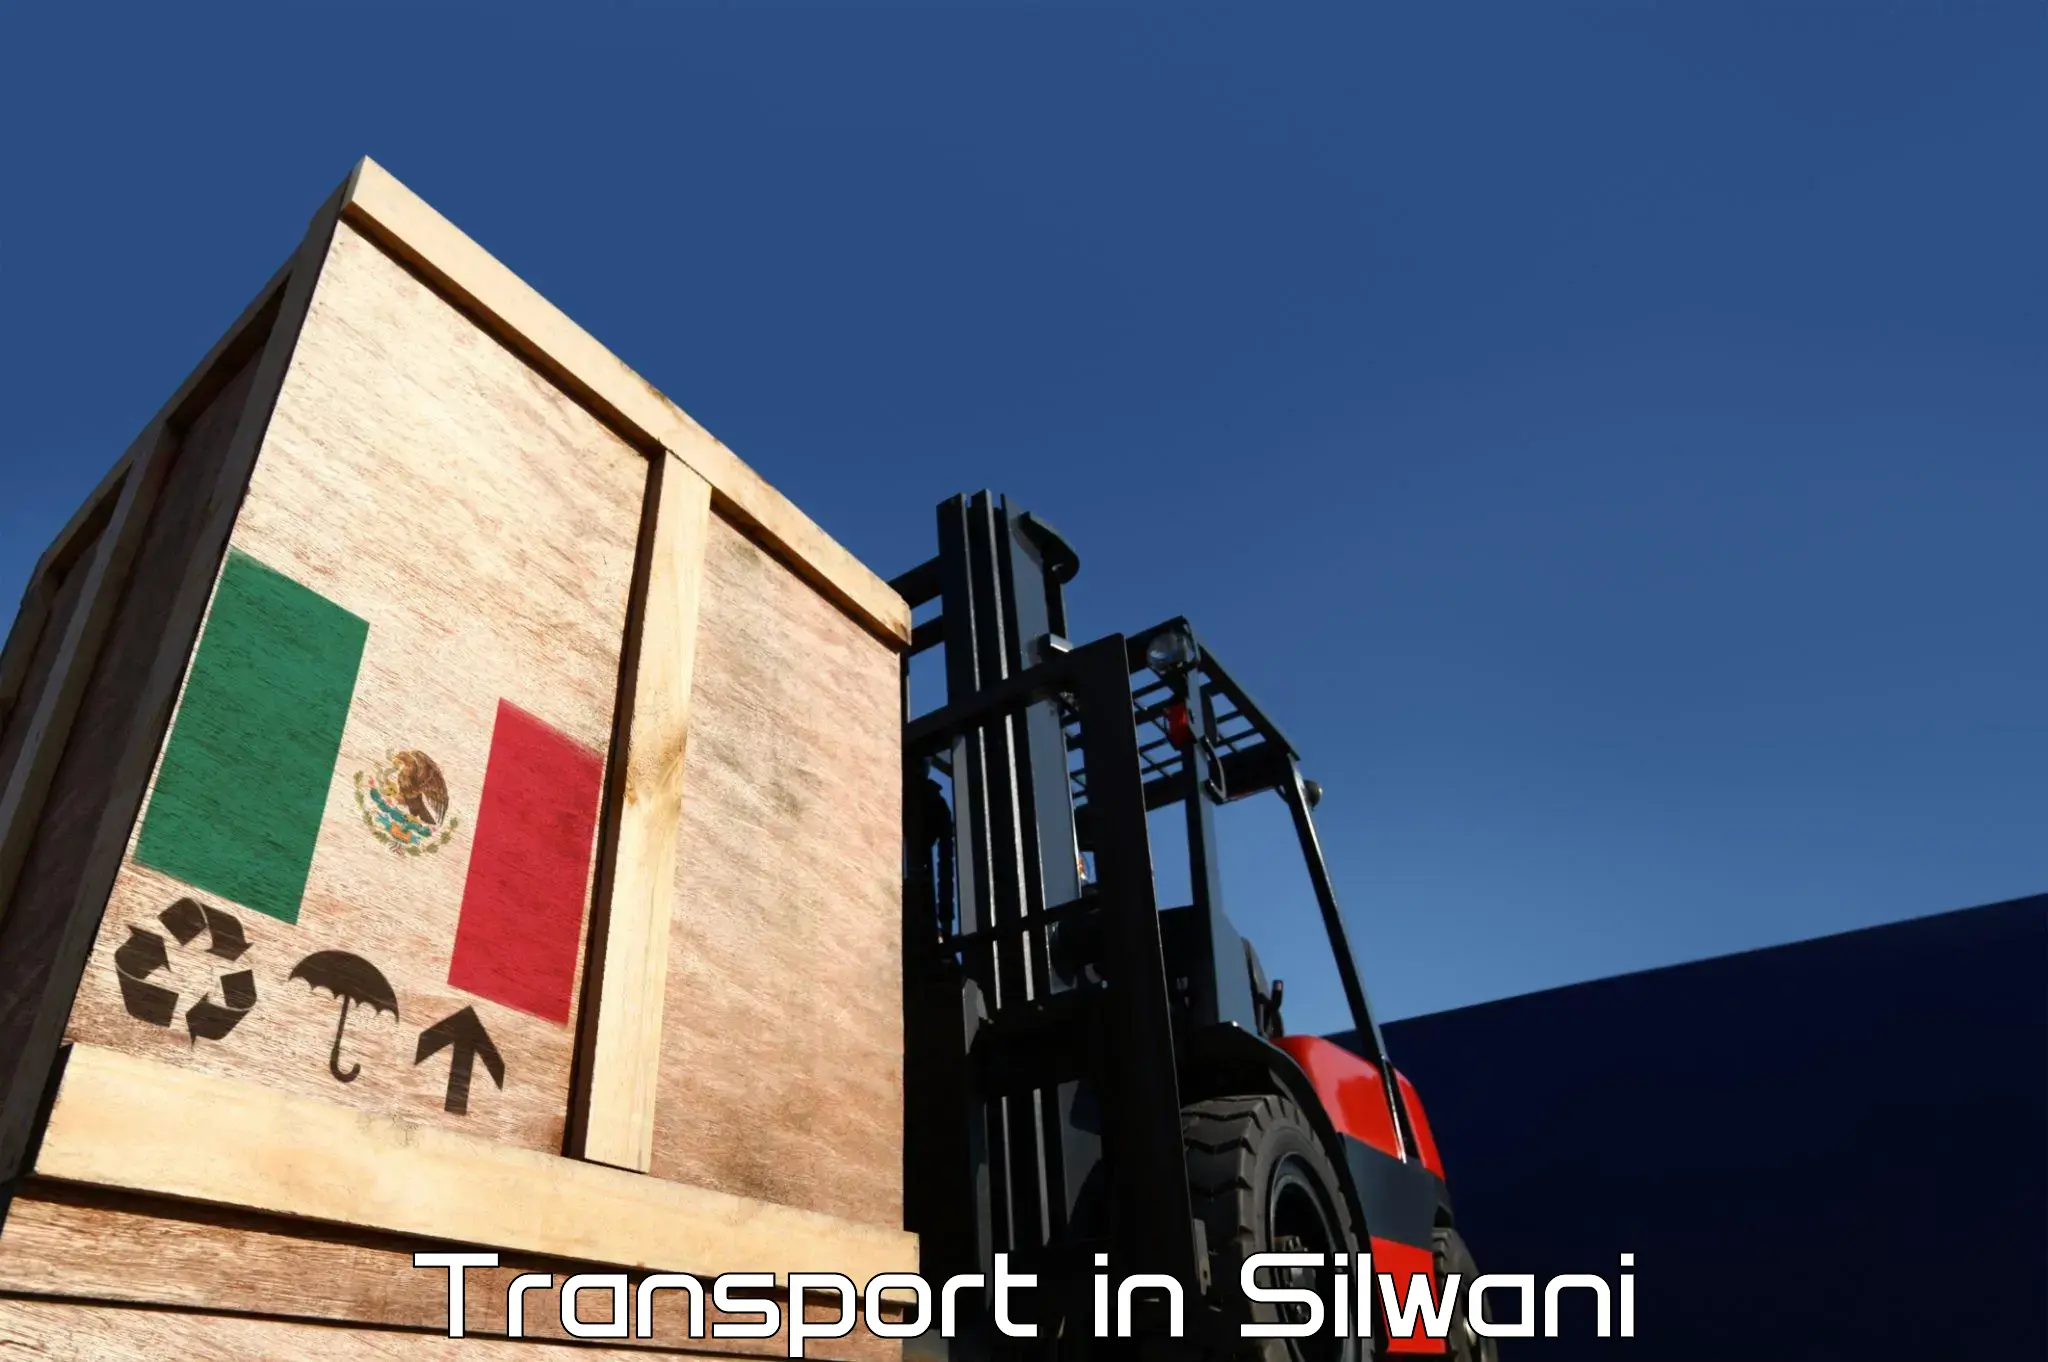 Road transport online services in Silwani